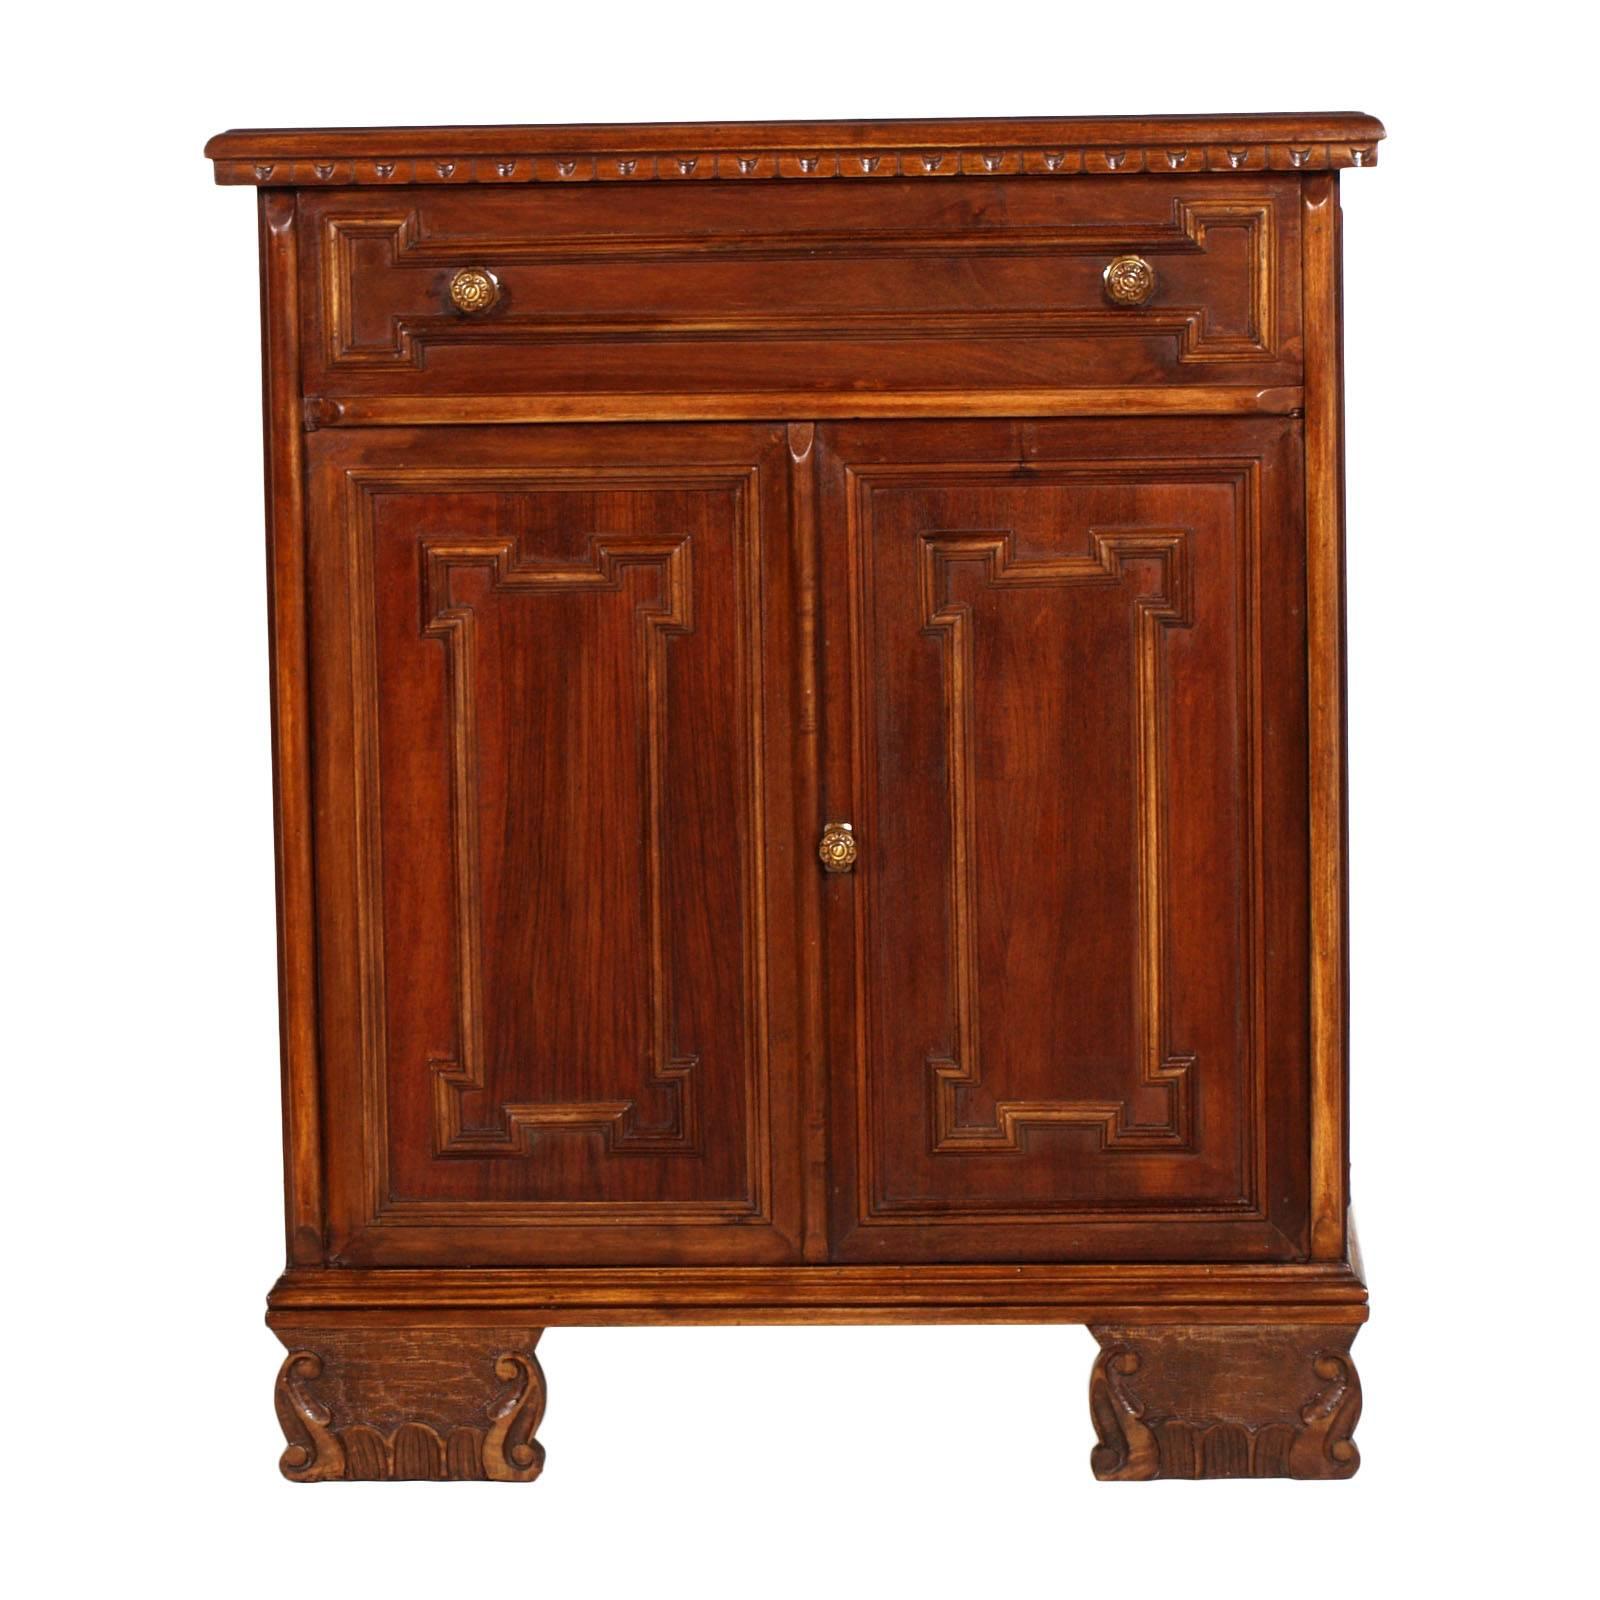 Early 1900s Tuscany Renaissance small cabinet sideboard with drawer, foot in hand carved base, Michele Bonciani Cascina attributable, in blod walnut, polished to wax


Measure cm: H 90, W 77, D 39.